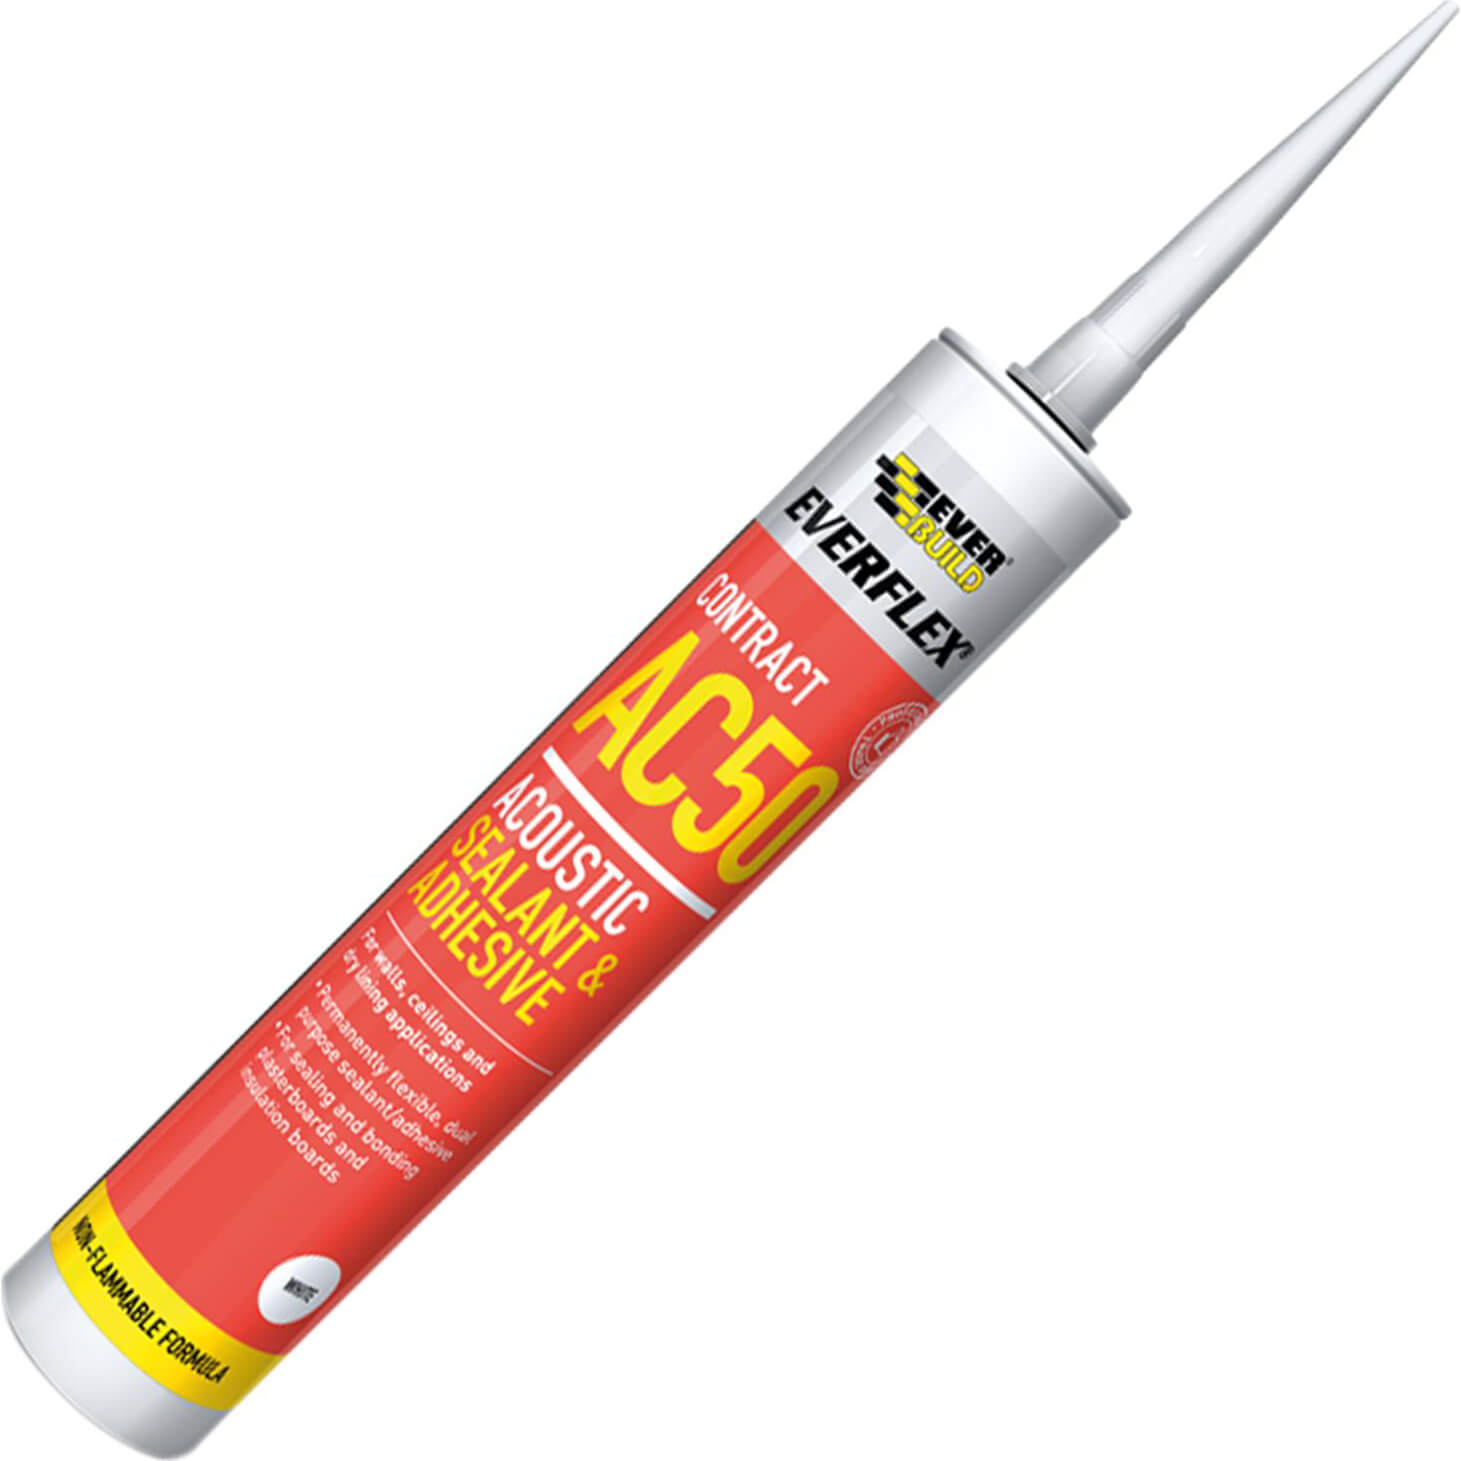 Image of Everbuild Acoustic Sealant and Adhesive 400ml